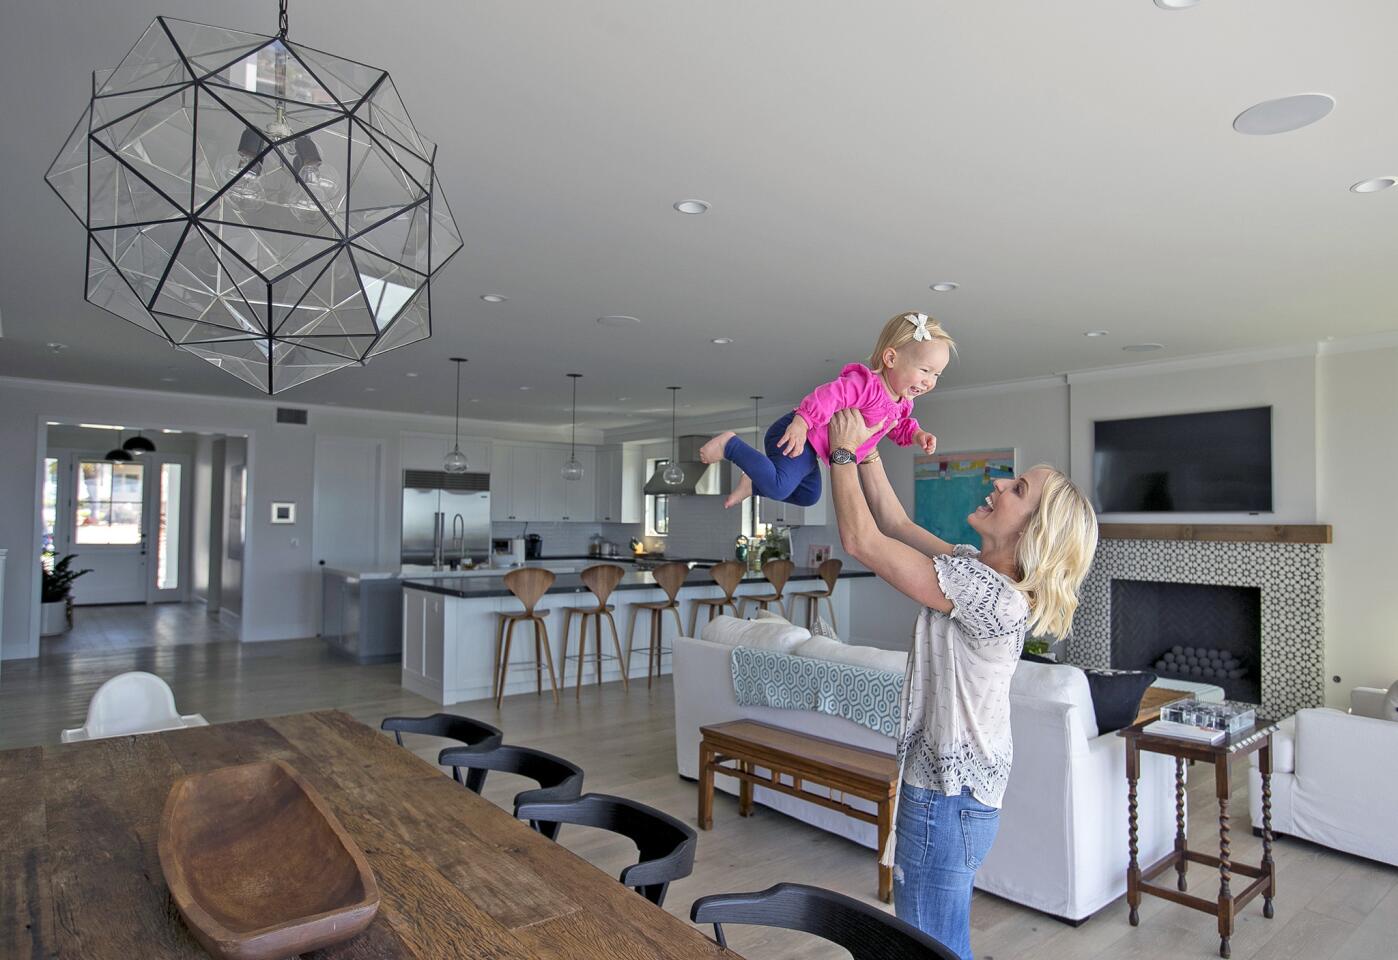 Newport Harbor Home Tour is in its 21st year